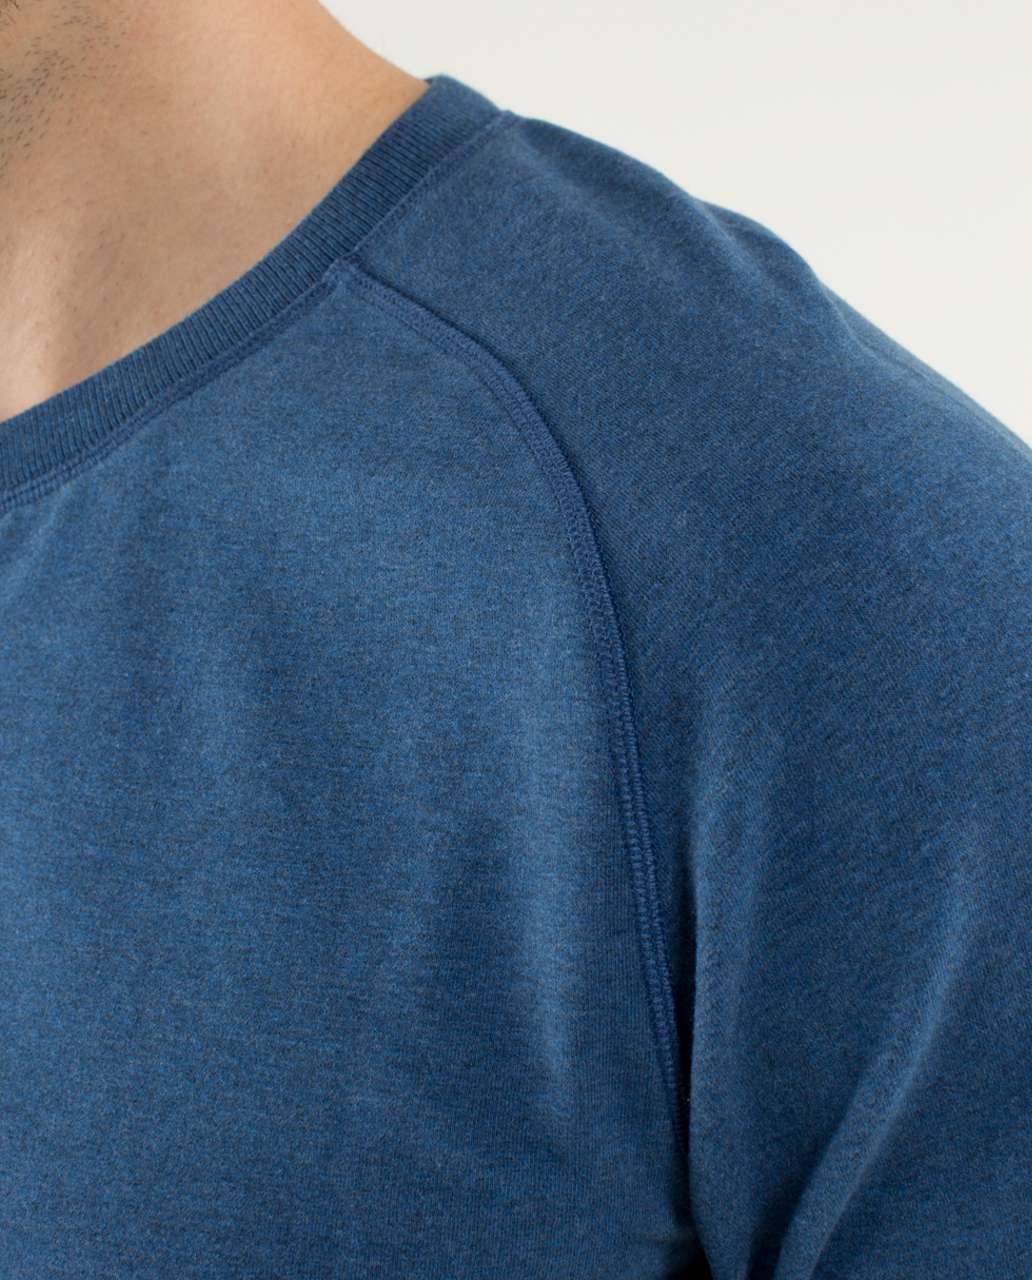 Lululemon All Town Henley - Heathered Rugged Blue / Inkwell